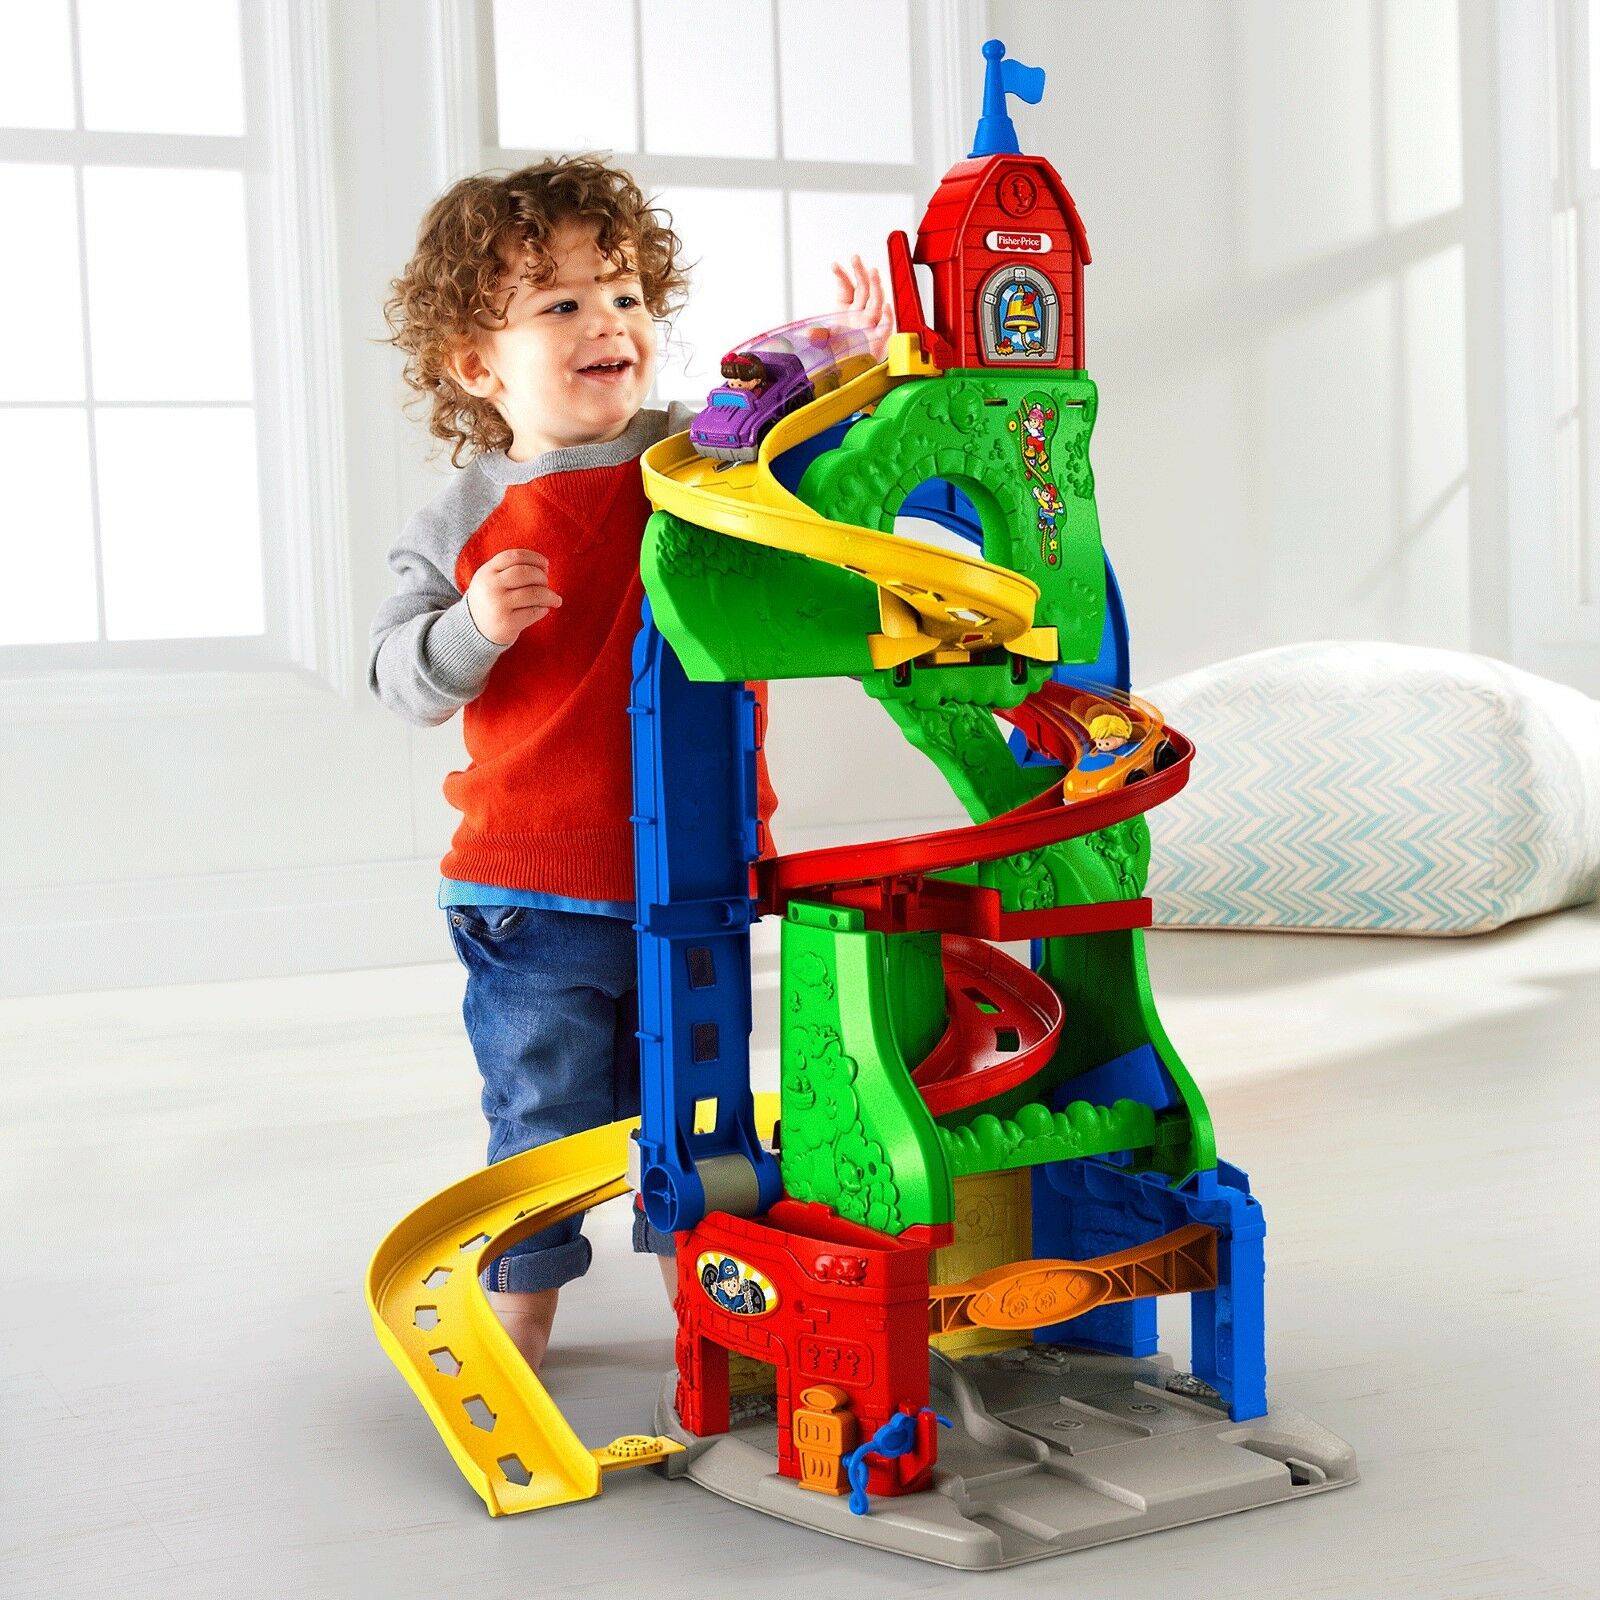 Educational Toys For Boys Little People With 2 Cars Fisher-price Fun For Kids